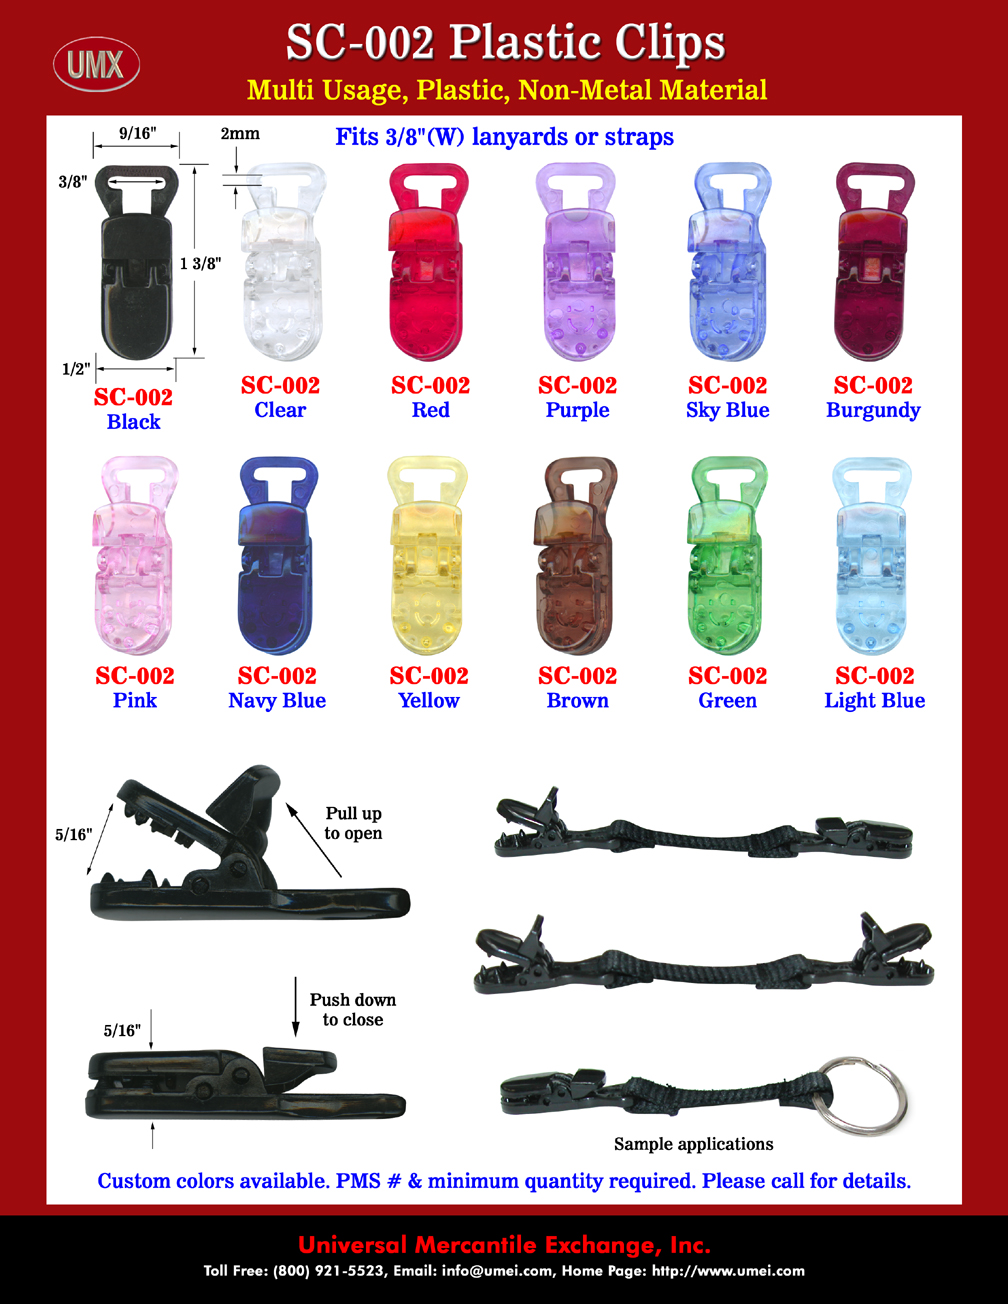 Our SC-002 plastic clips are great design for a variety of applications, like making fashion clothing, head clips, head set clips, pacifier clips, furniture, car, luggage, outdoor sporting accessories, name badges or lanyards. 